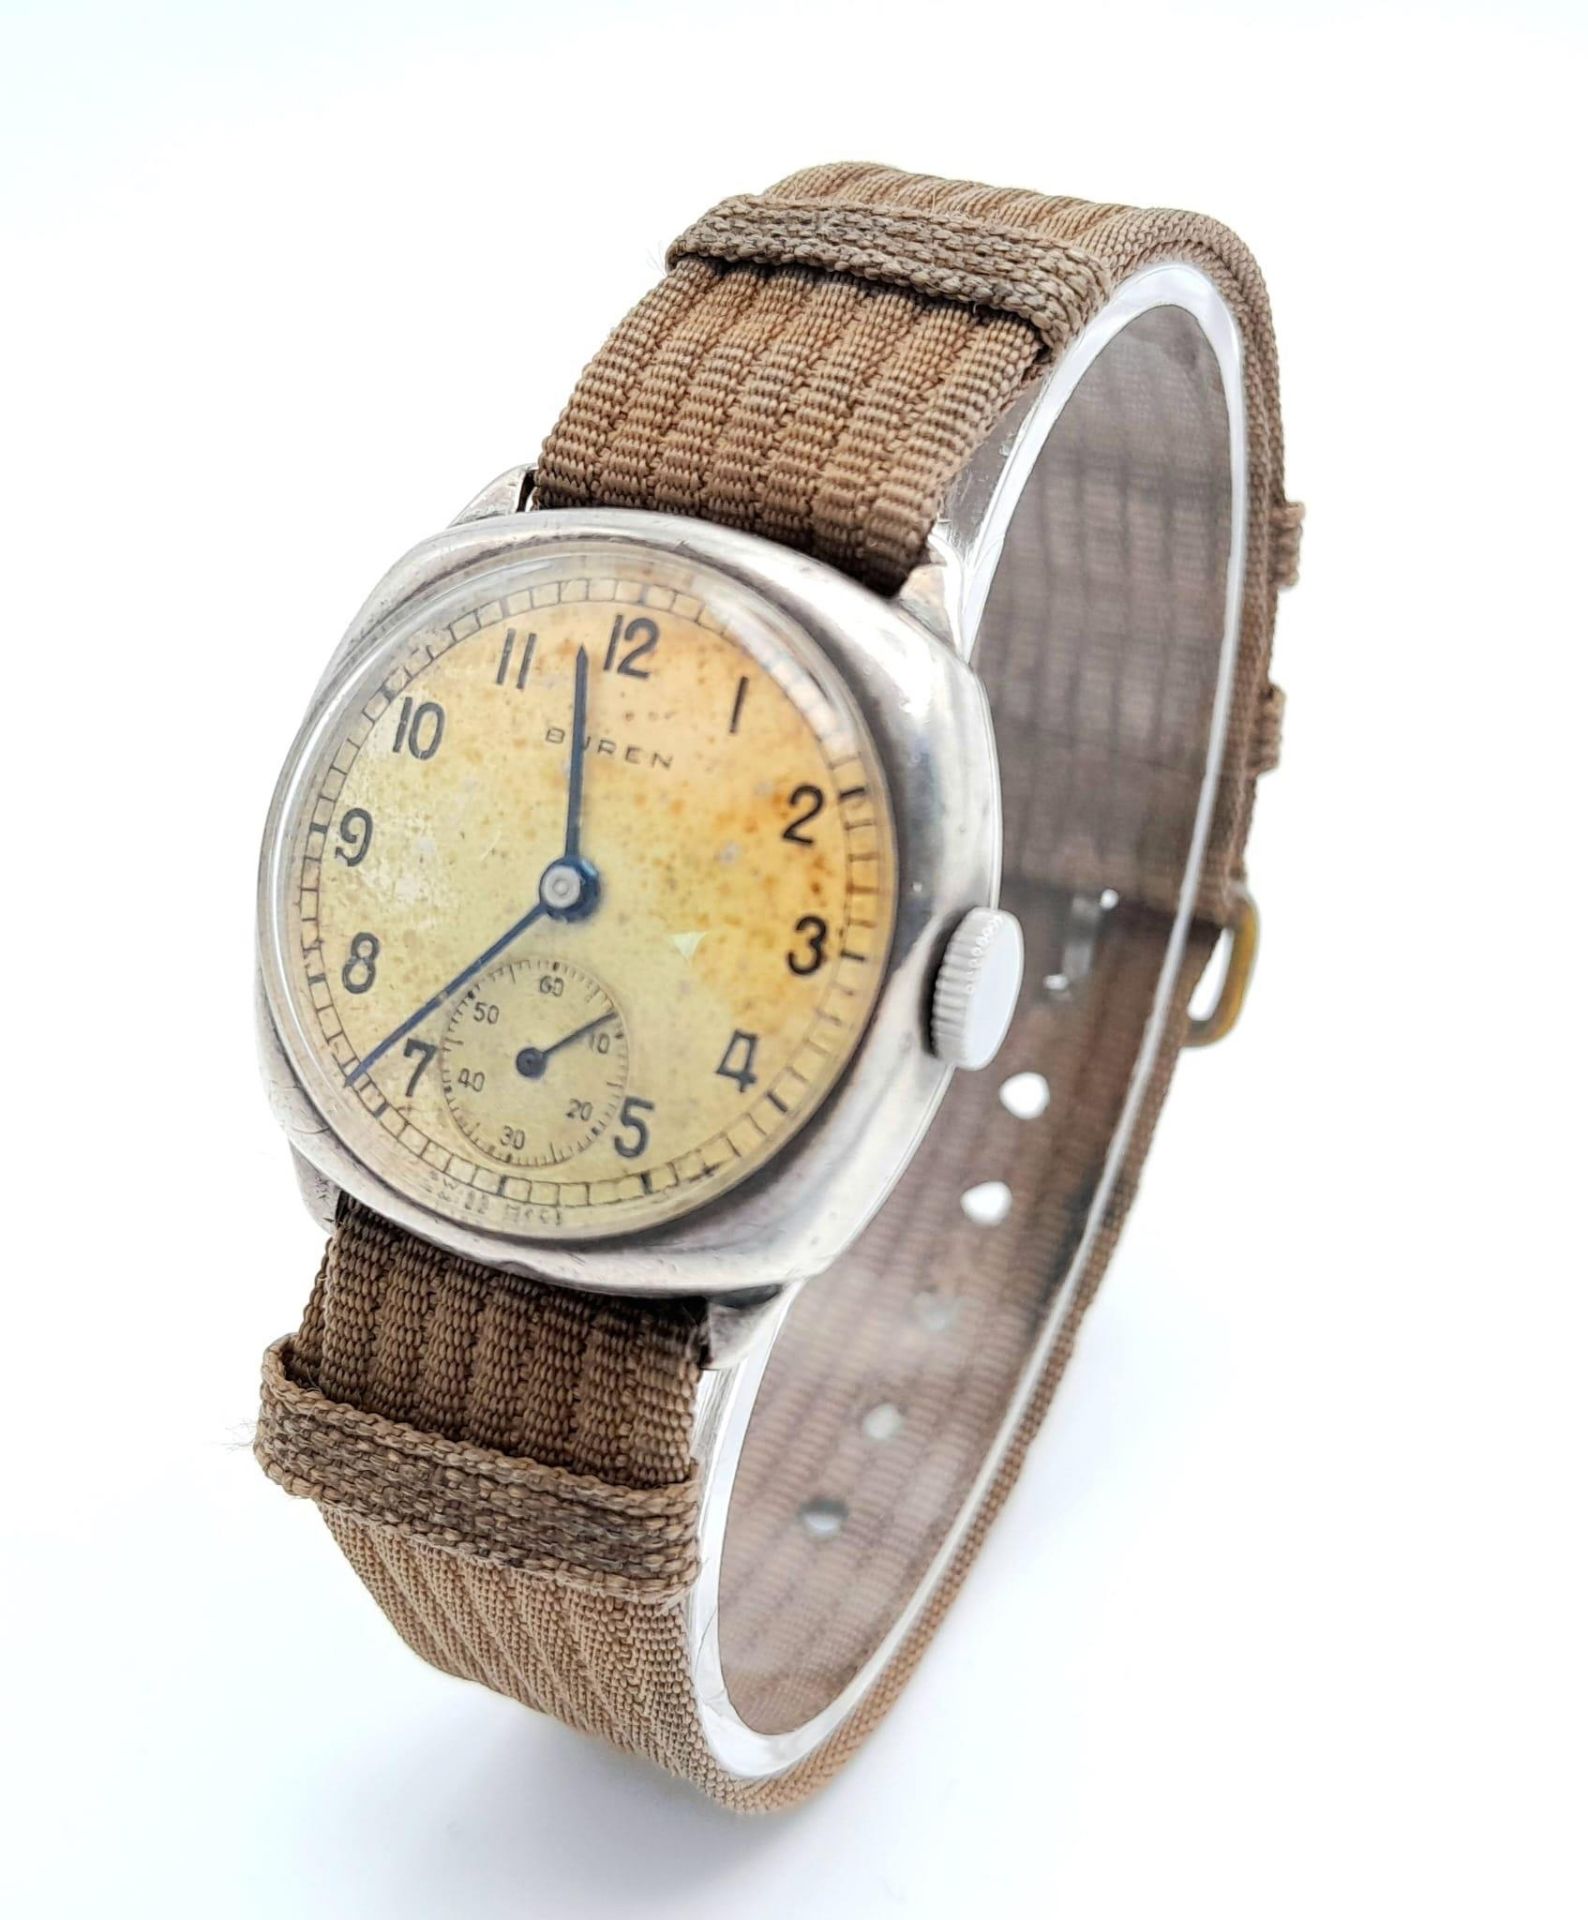 A Vintage Buren (1940s) Mechanical Gents Watch. Textile strap. Stainless steel case - 30mm. Patinaed